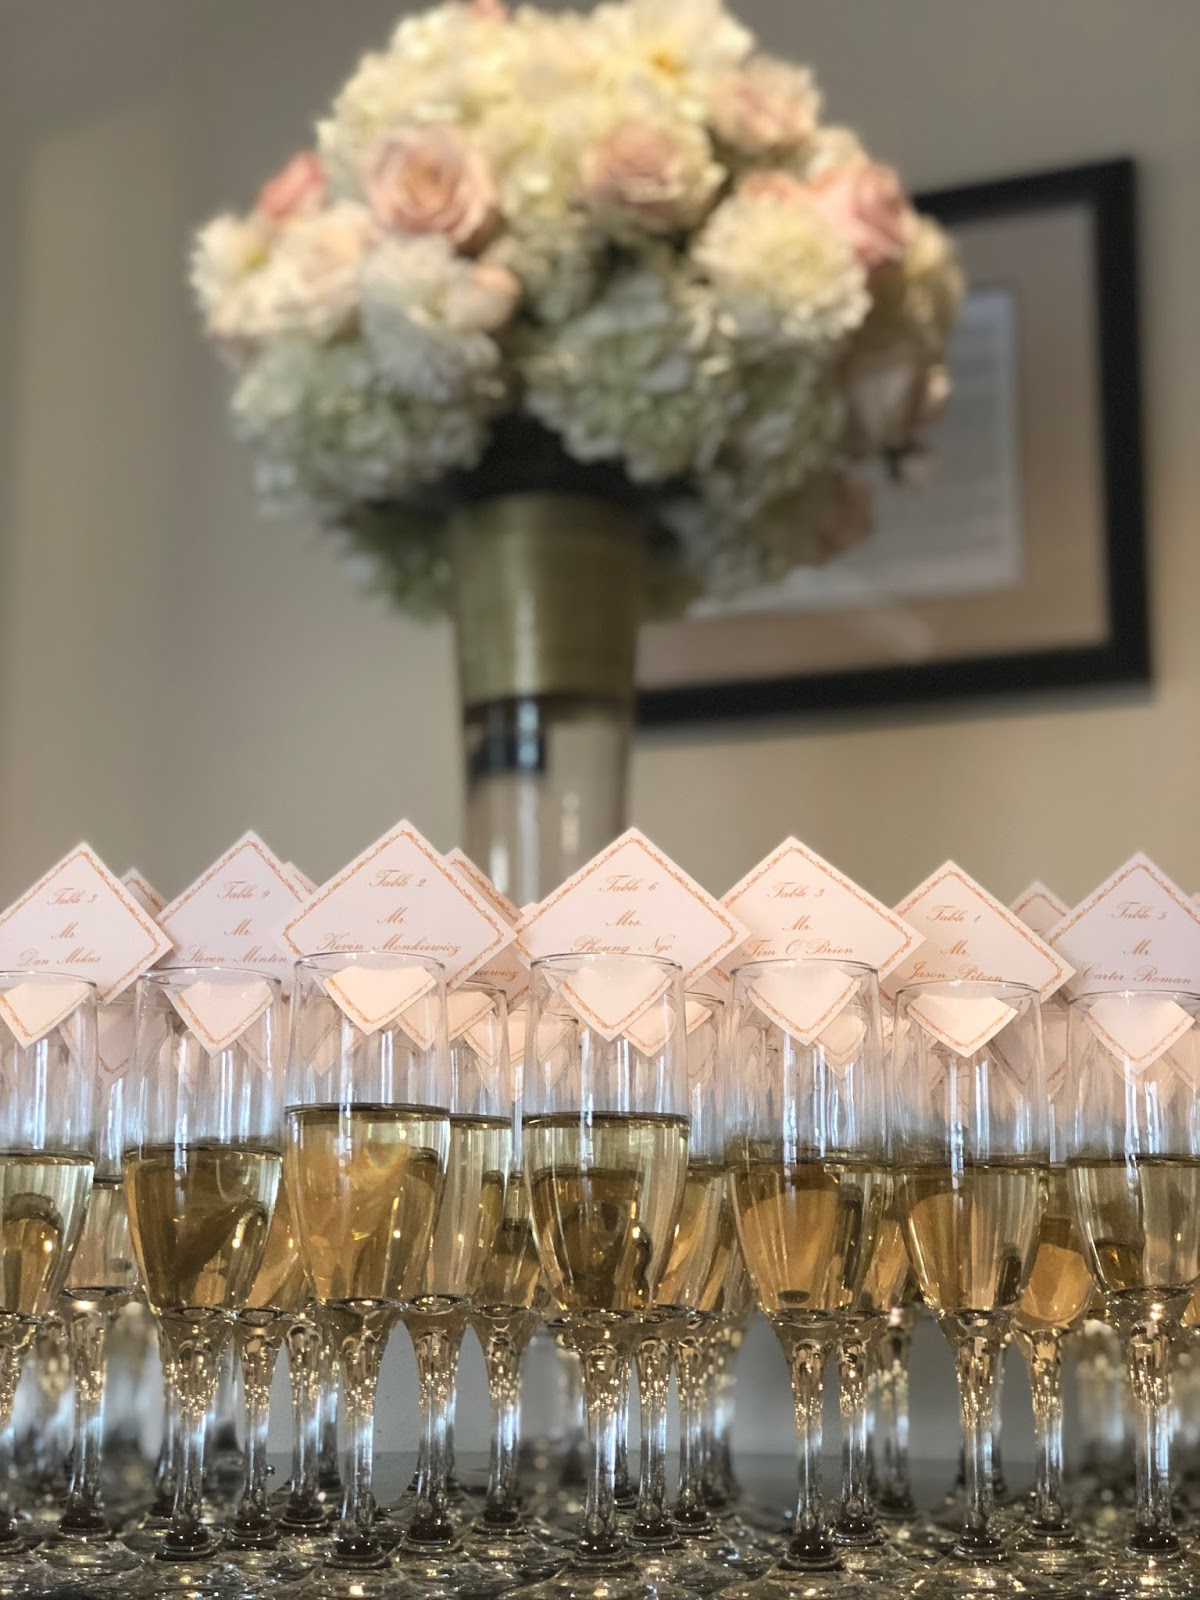 boston wedding planners, where to get married in boston, country club wedding new england, florals by jeri, florists in boston, wedding flowers, boston wedding planner, escort card table, place cards, champagne escort card table